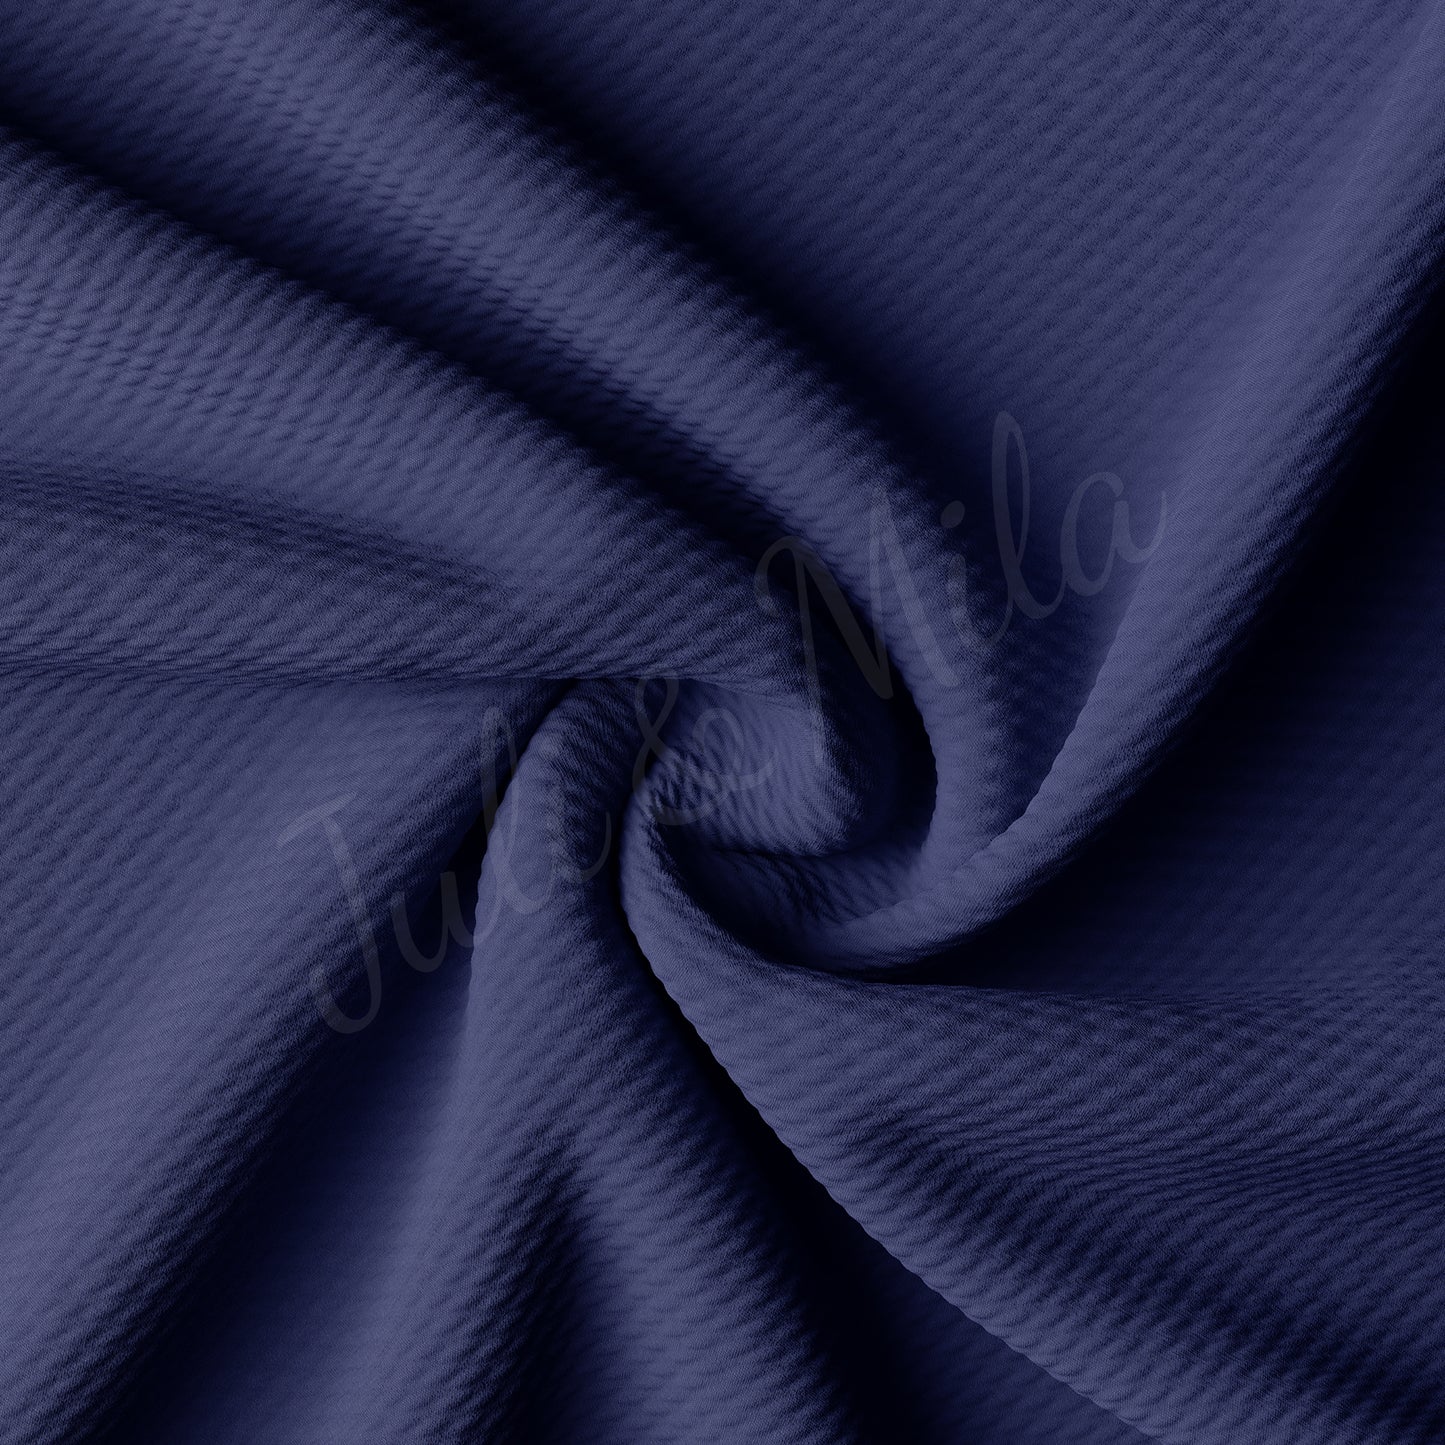 Royal Blue Liverpool Bullet Textured Fabric